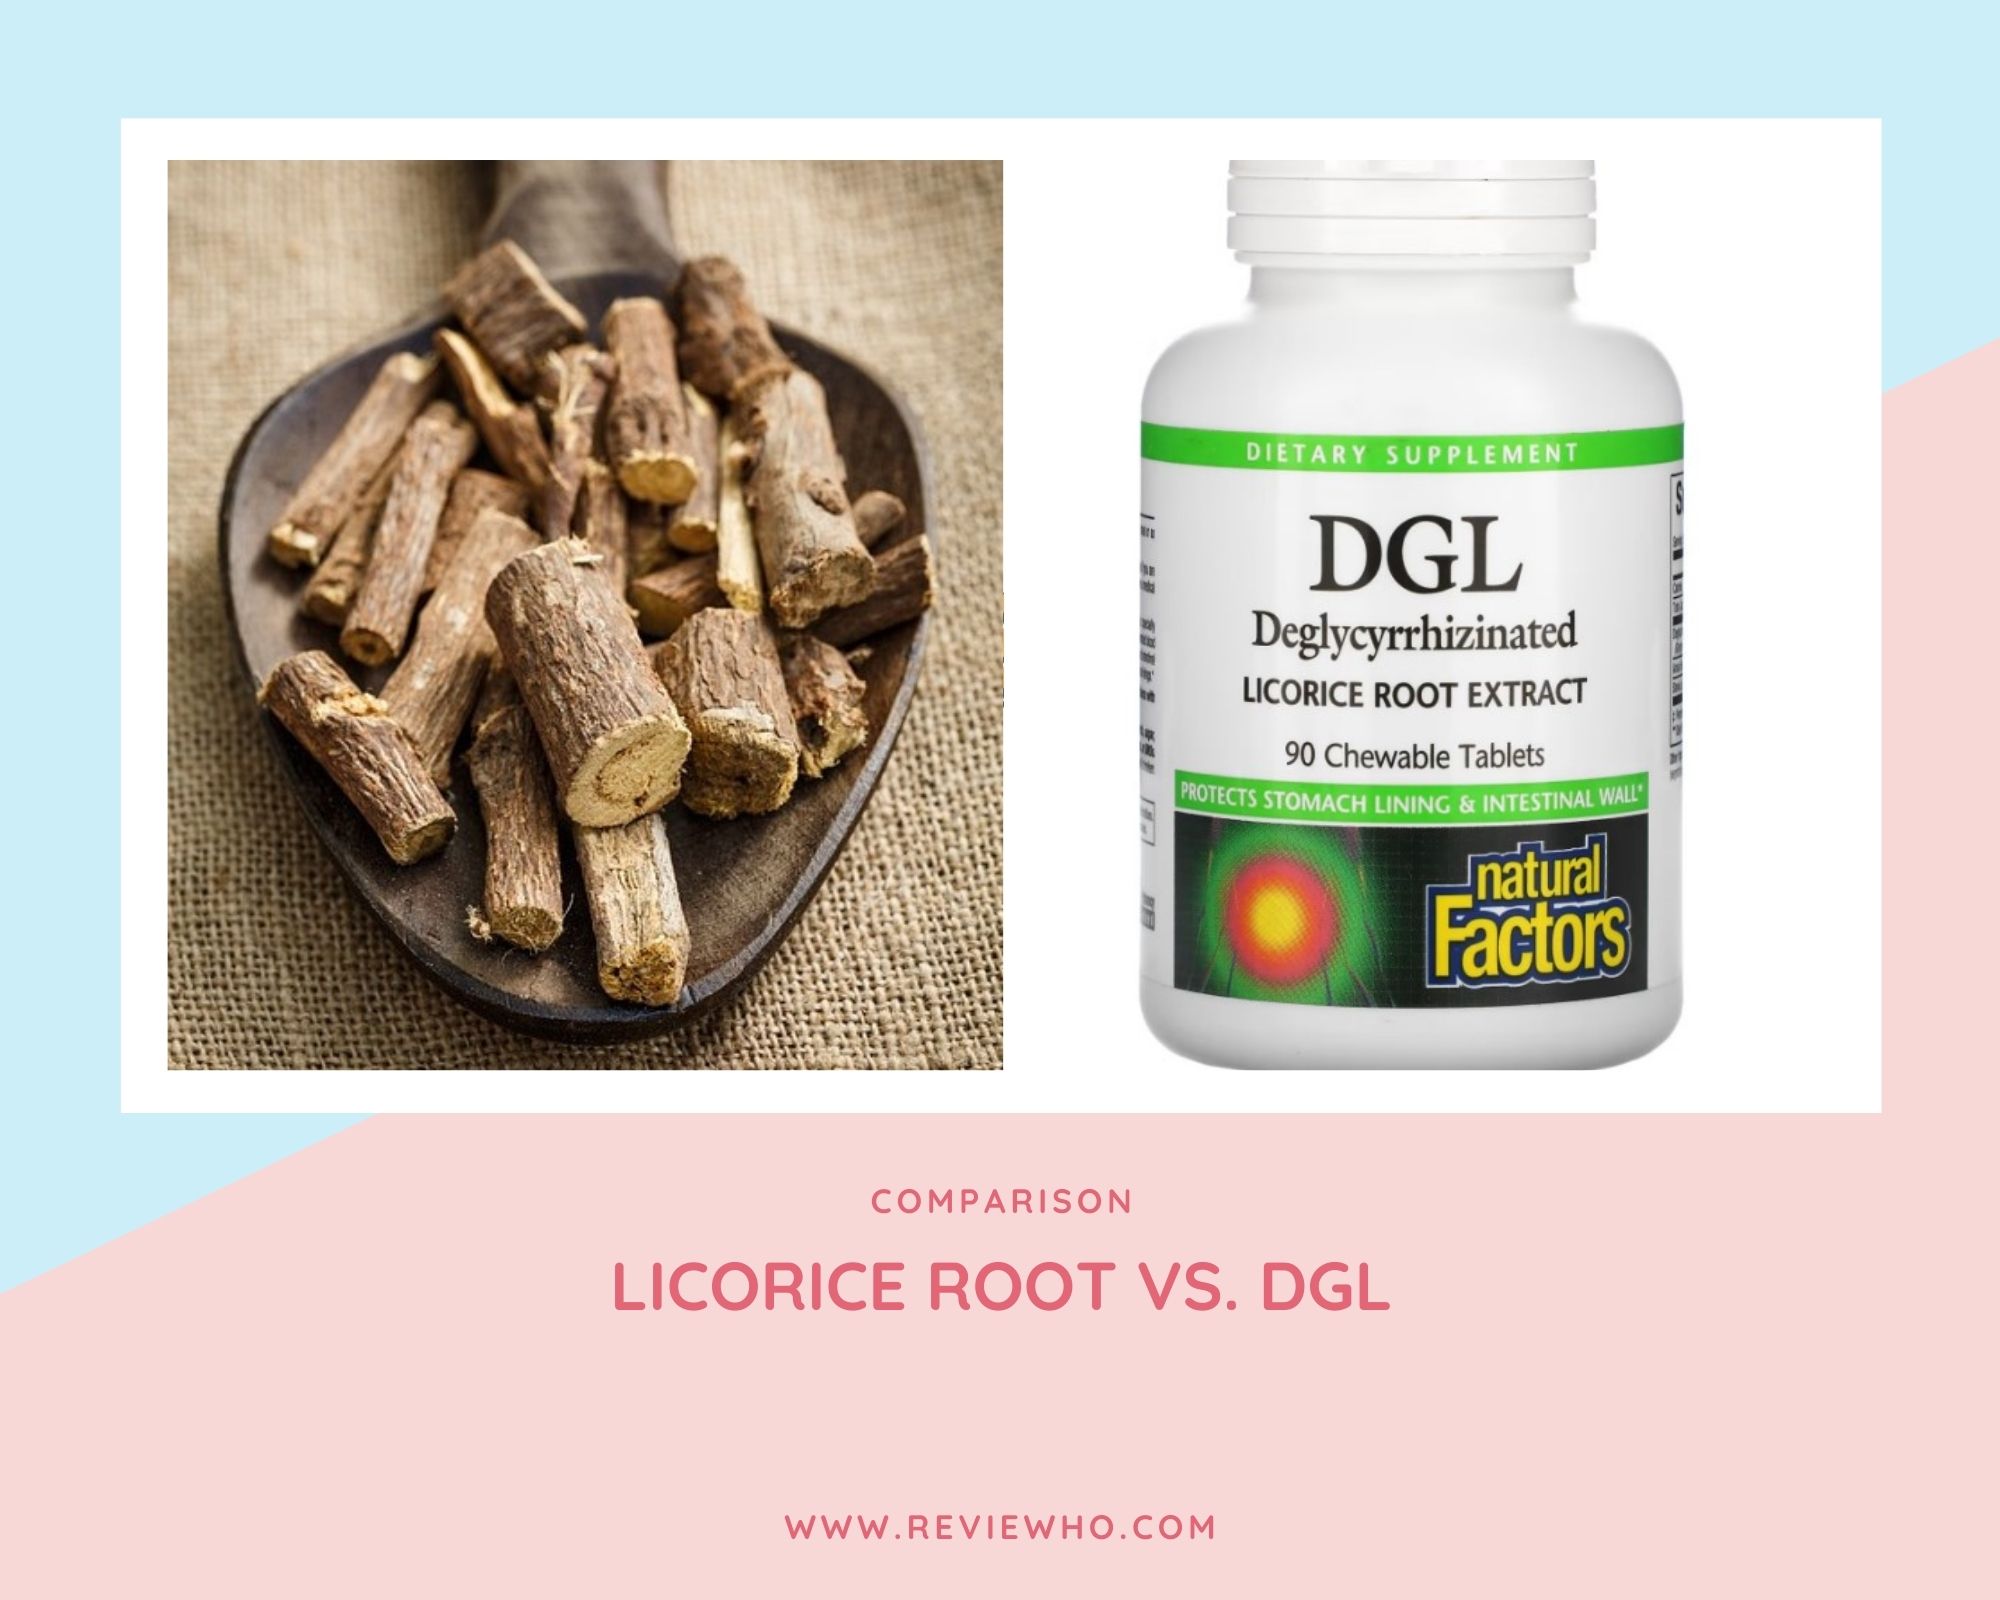 Difference between Licorice Root and DGL